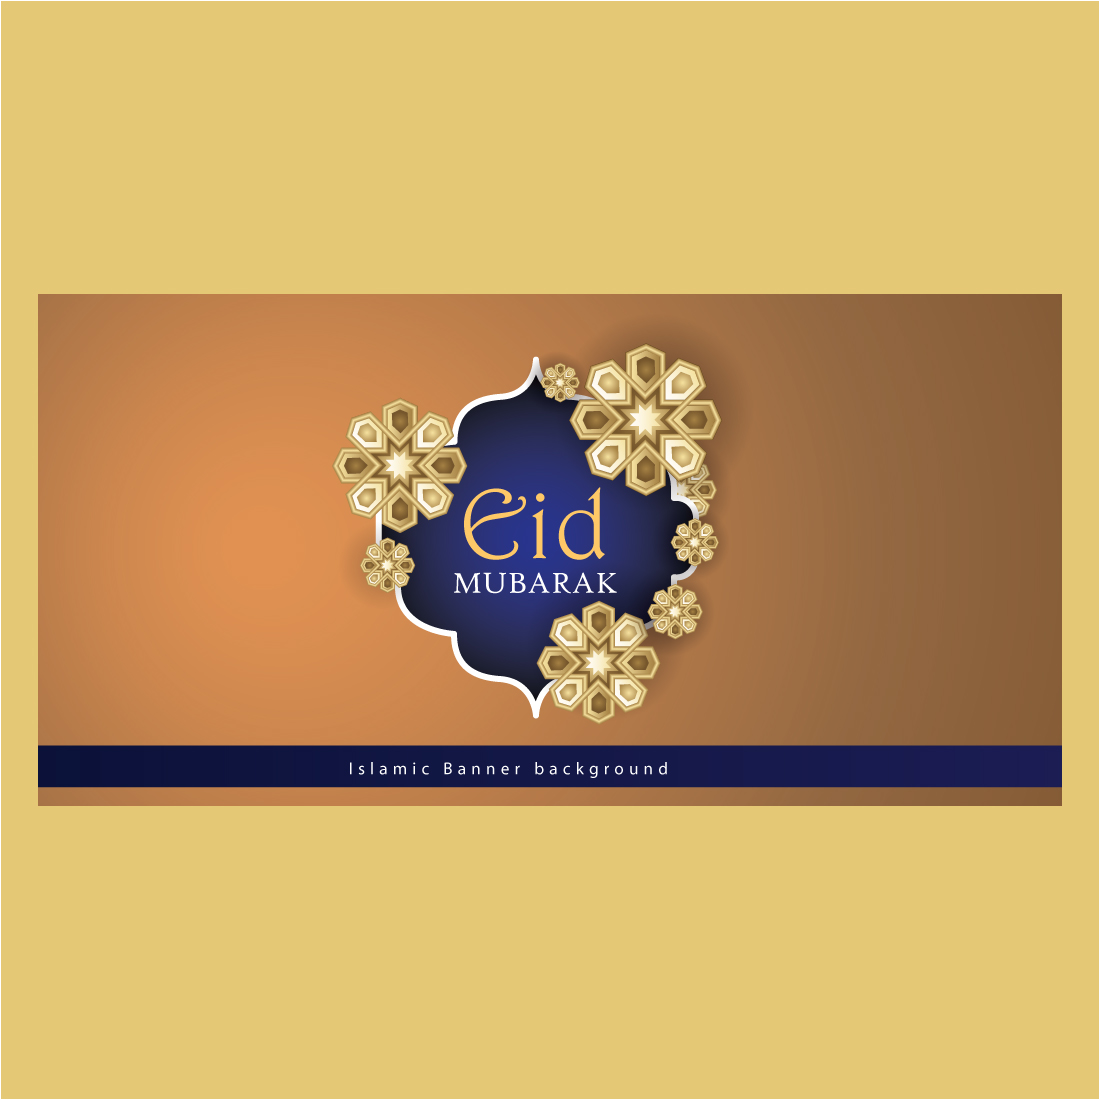 Islamic Banner Background with a Aesthetic Eid Mubarak preview image.